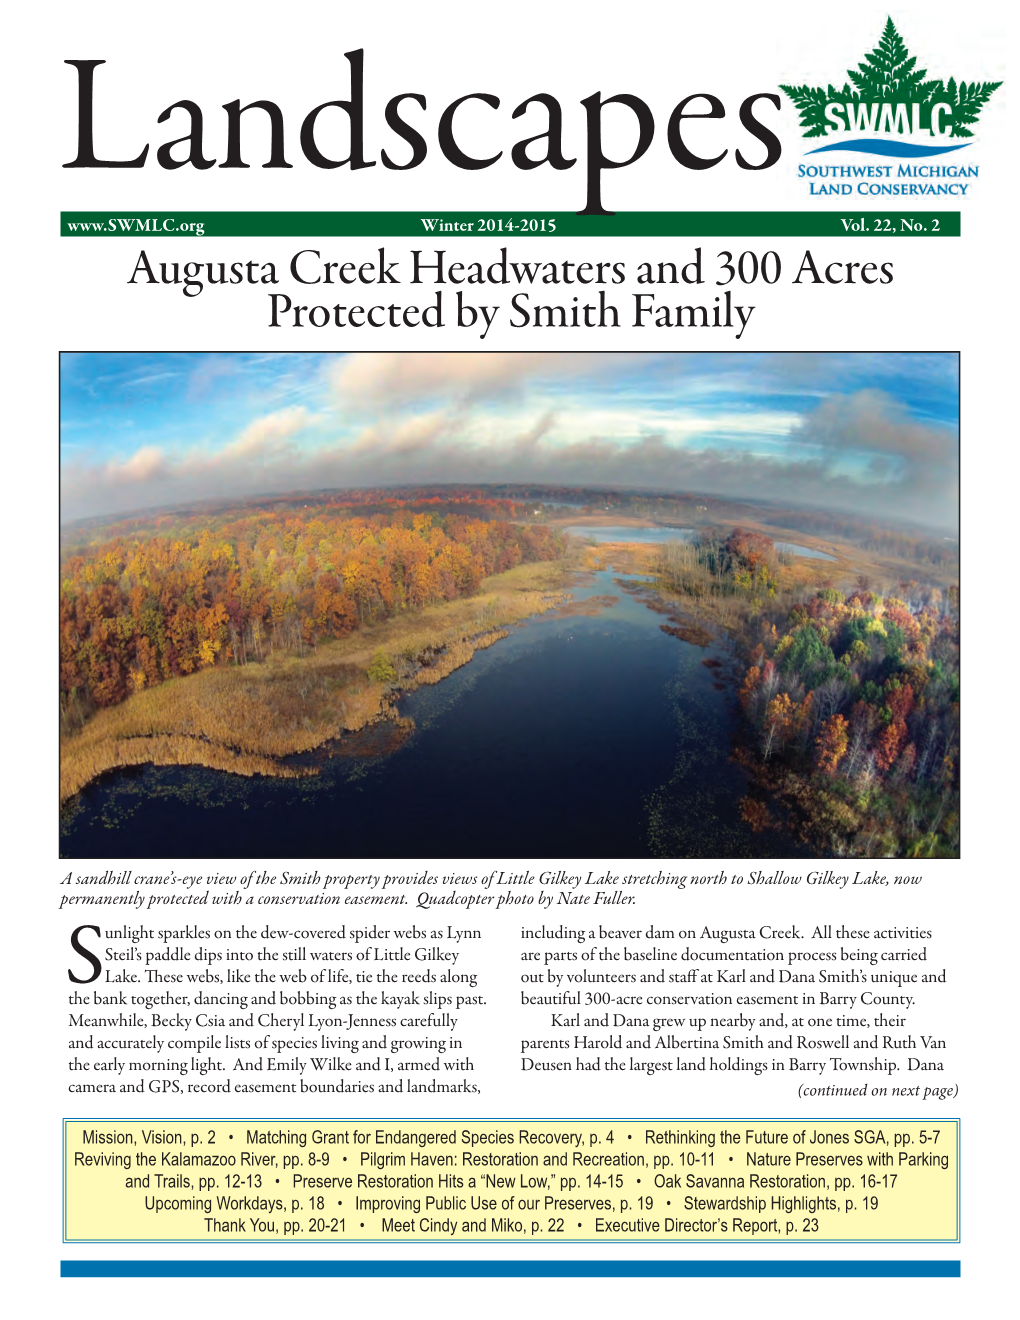 Augusta Creek Headwaters and 300 Acres Protected by Smith Family